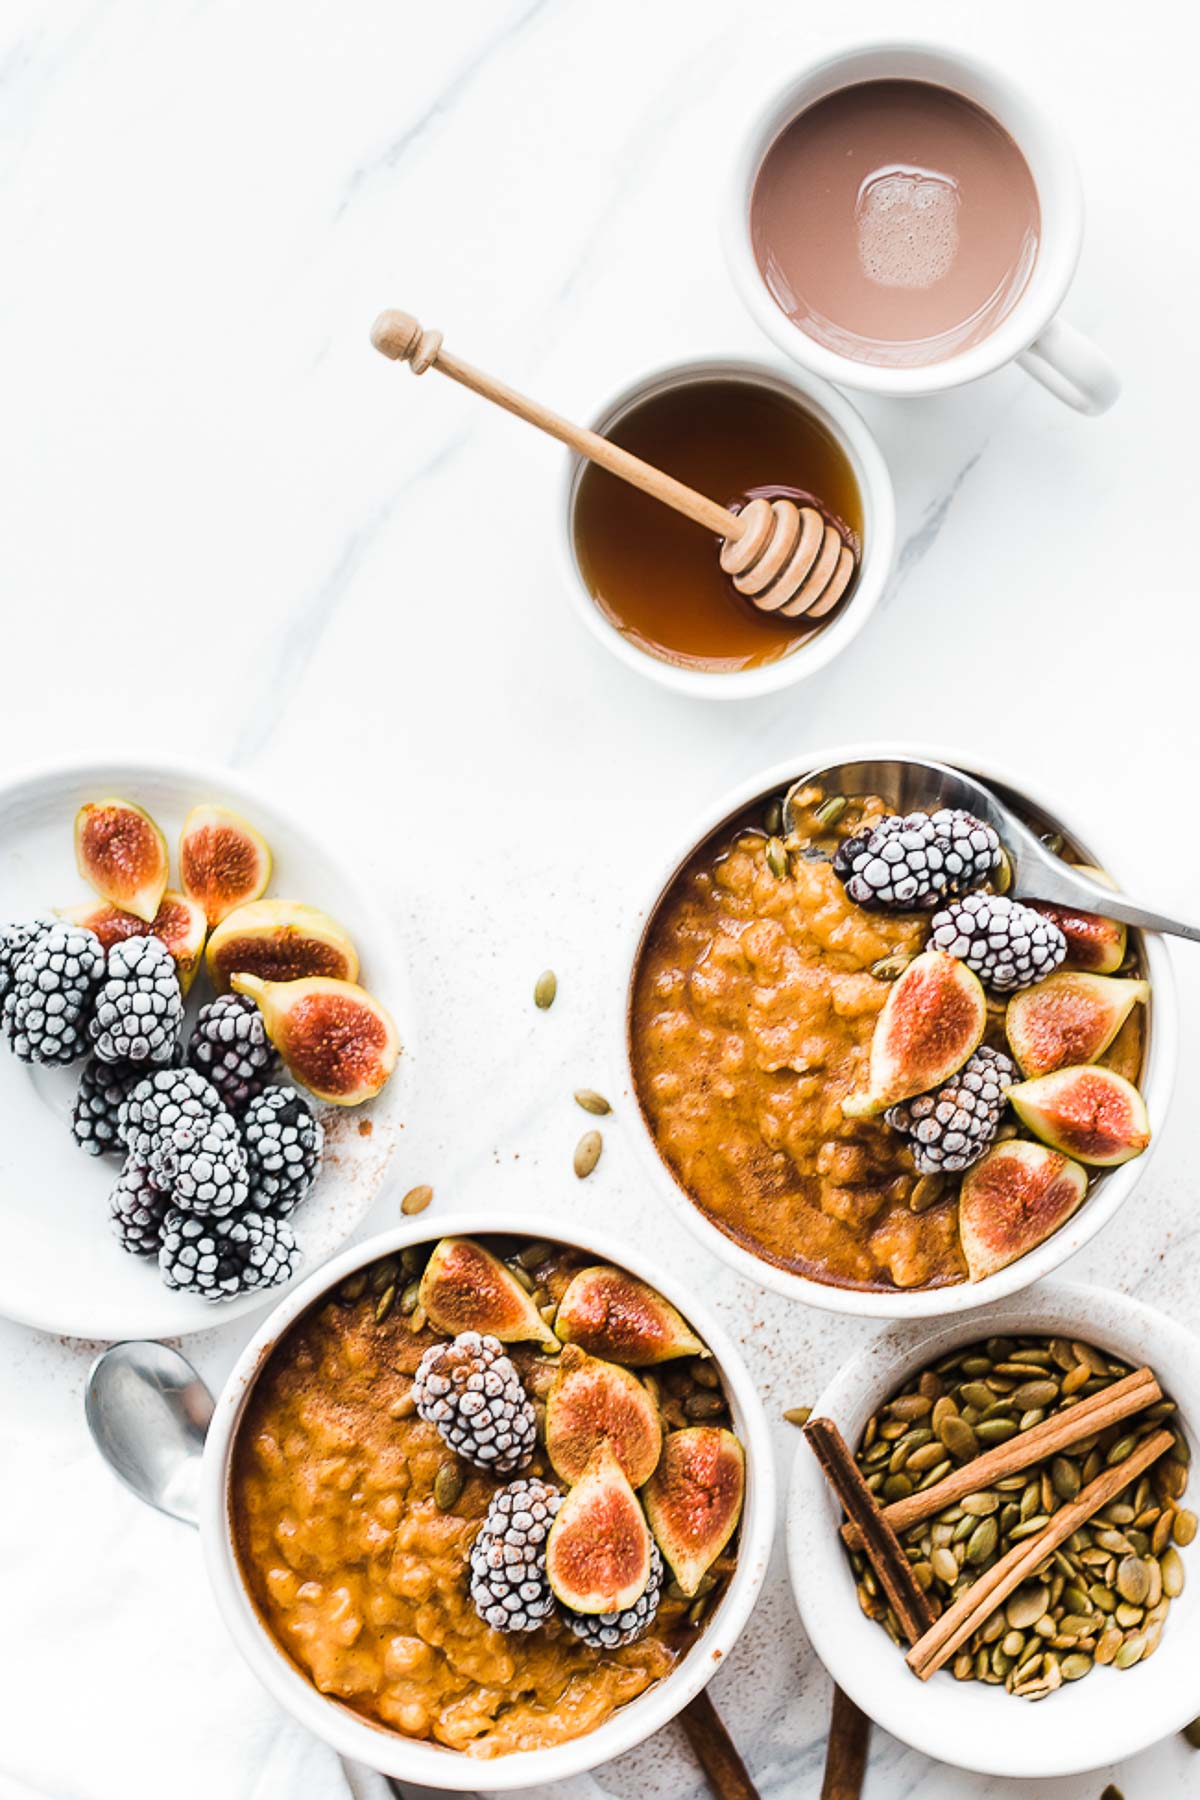 Two bowls of pumpkin oatmeal. The oats are garnished with berries and gas, and there are small bowls of berries and honey to the side.